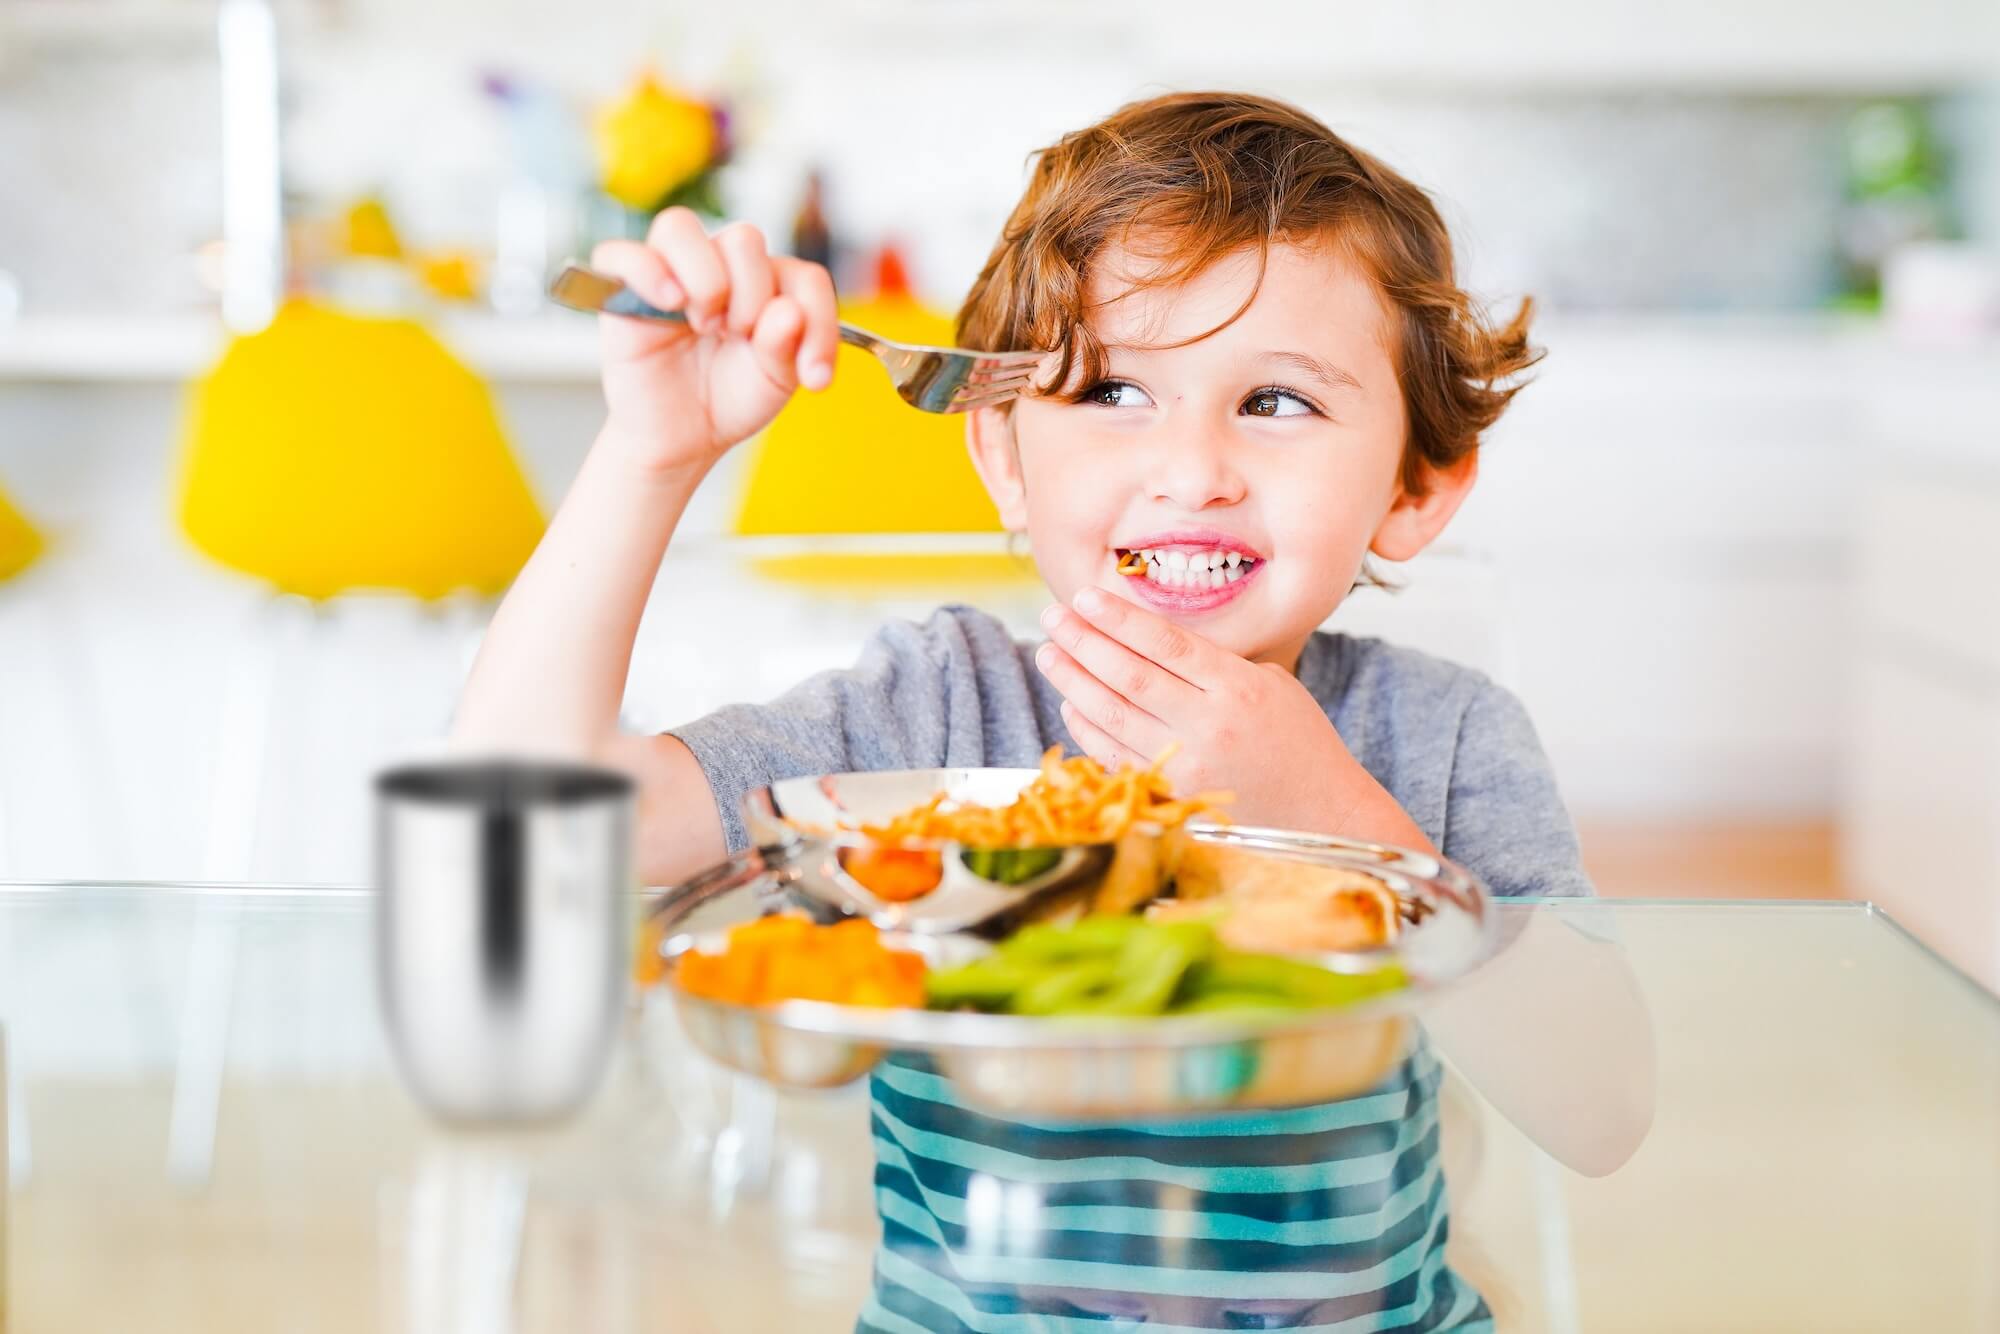 boy eating meal on stainless steel dishes